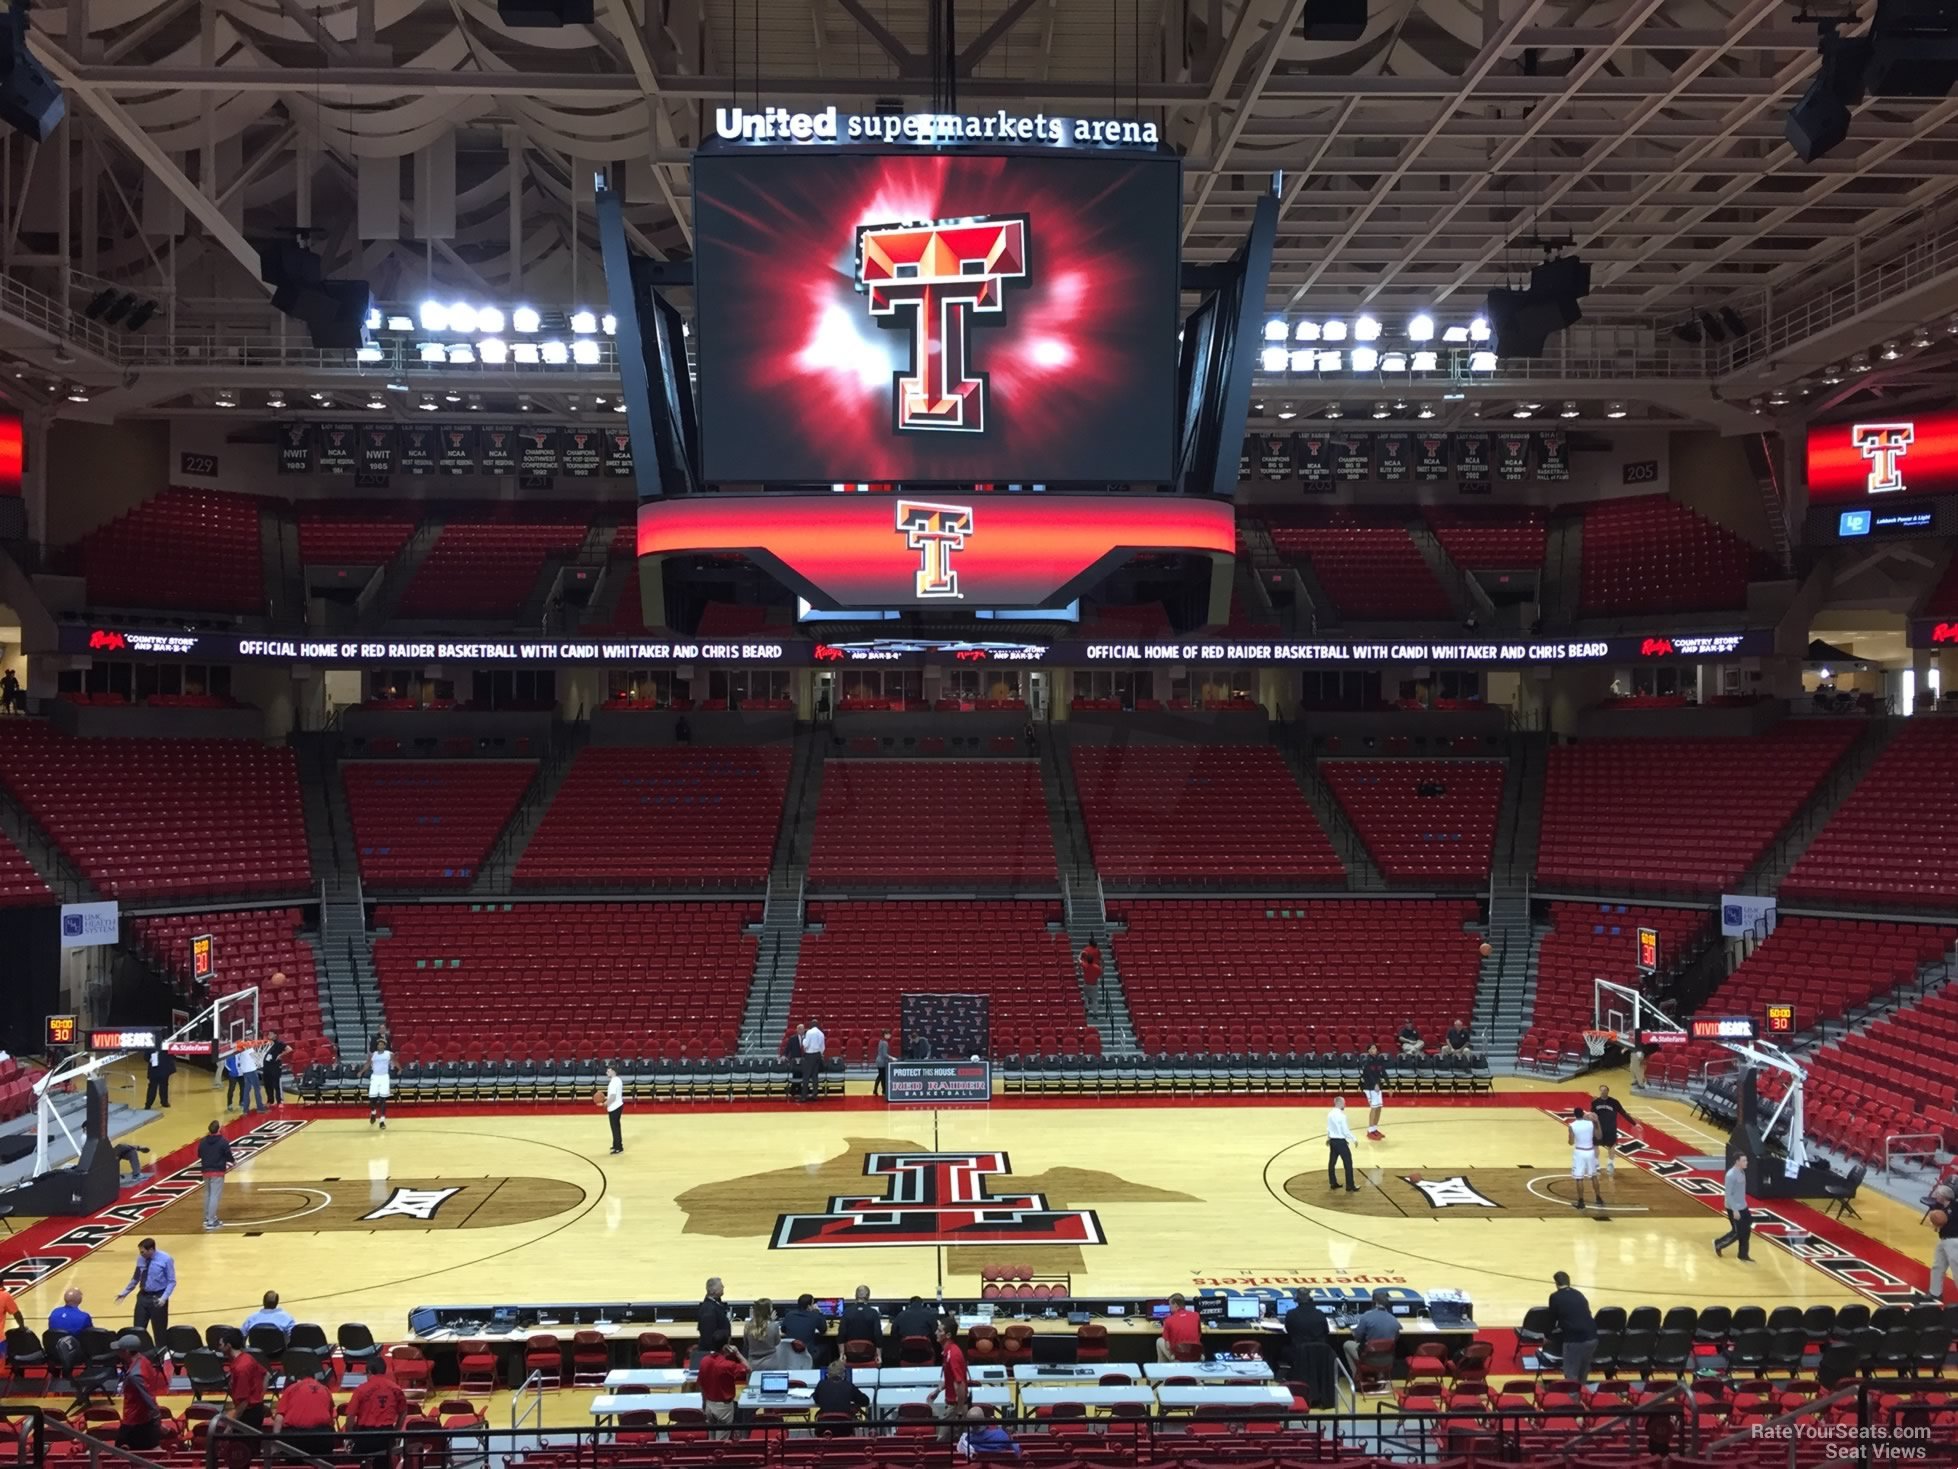 section 113, row 25 seat view  - united supermarkets arena